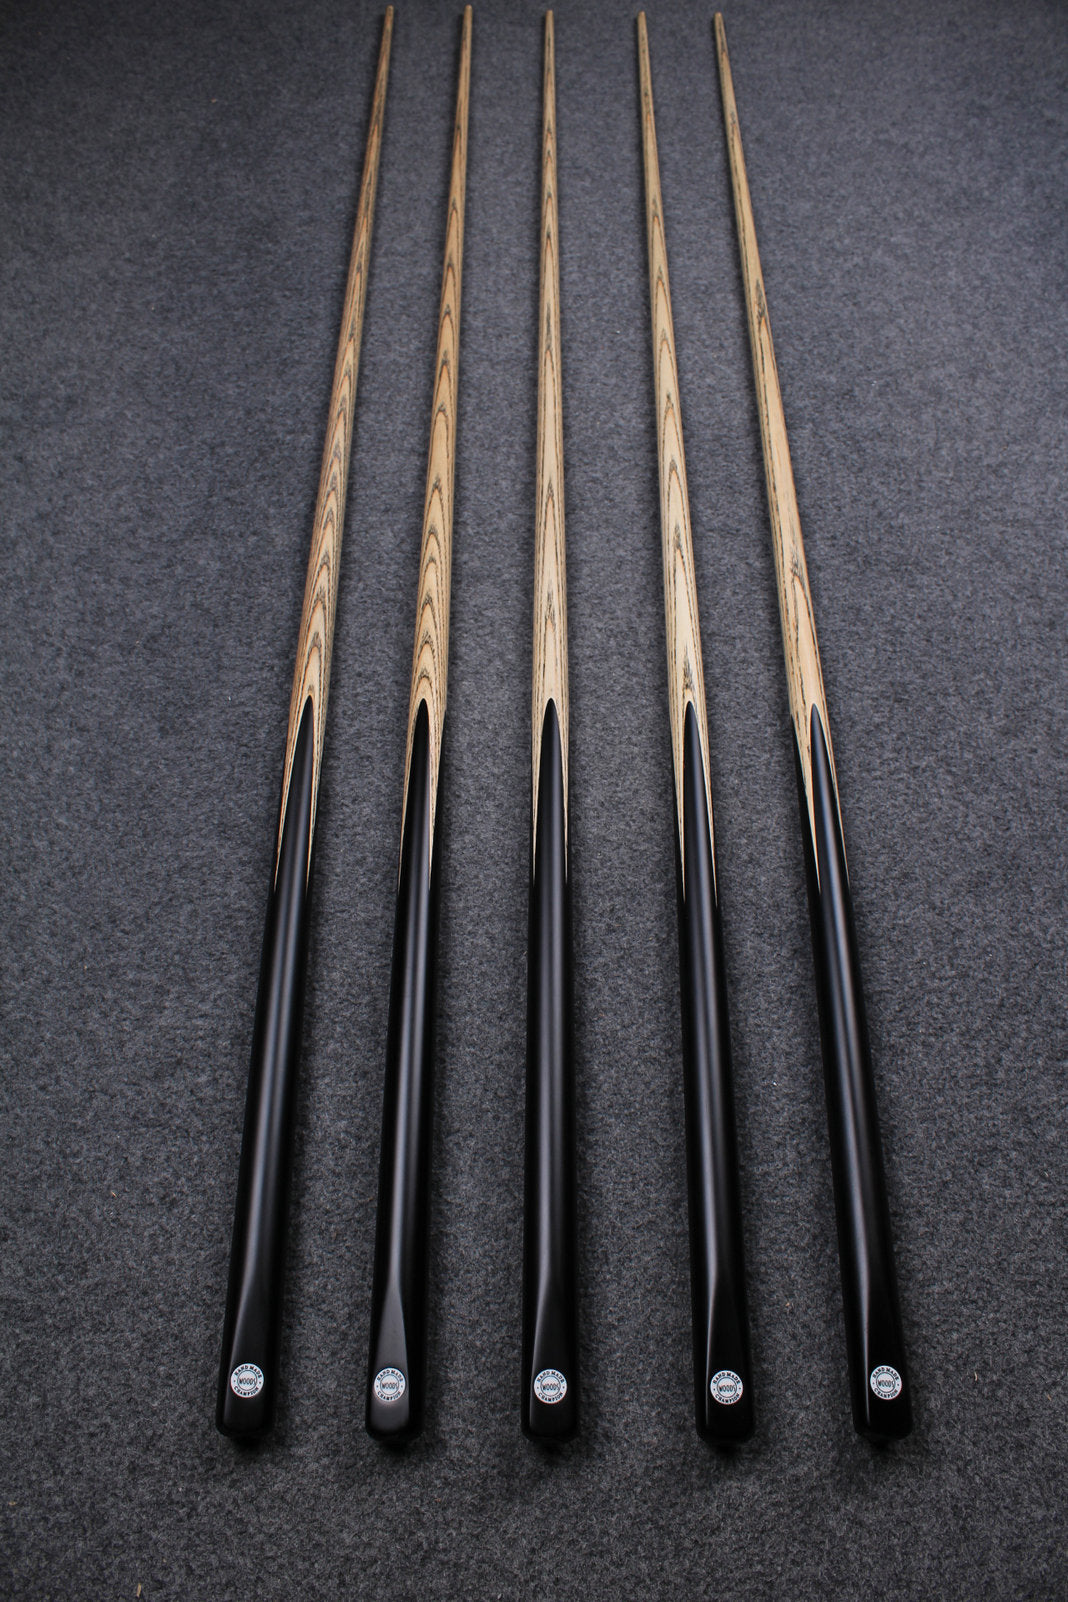 1 piece handmade ash english pool cue - variant length , variant tip size